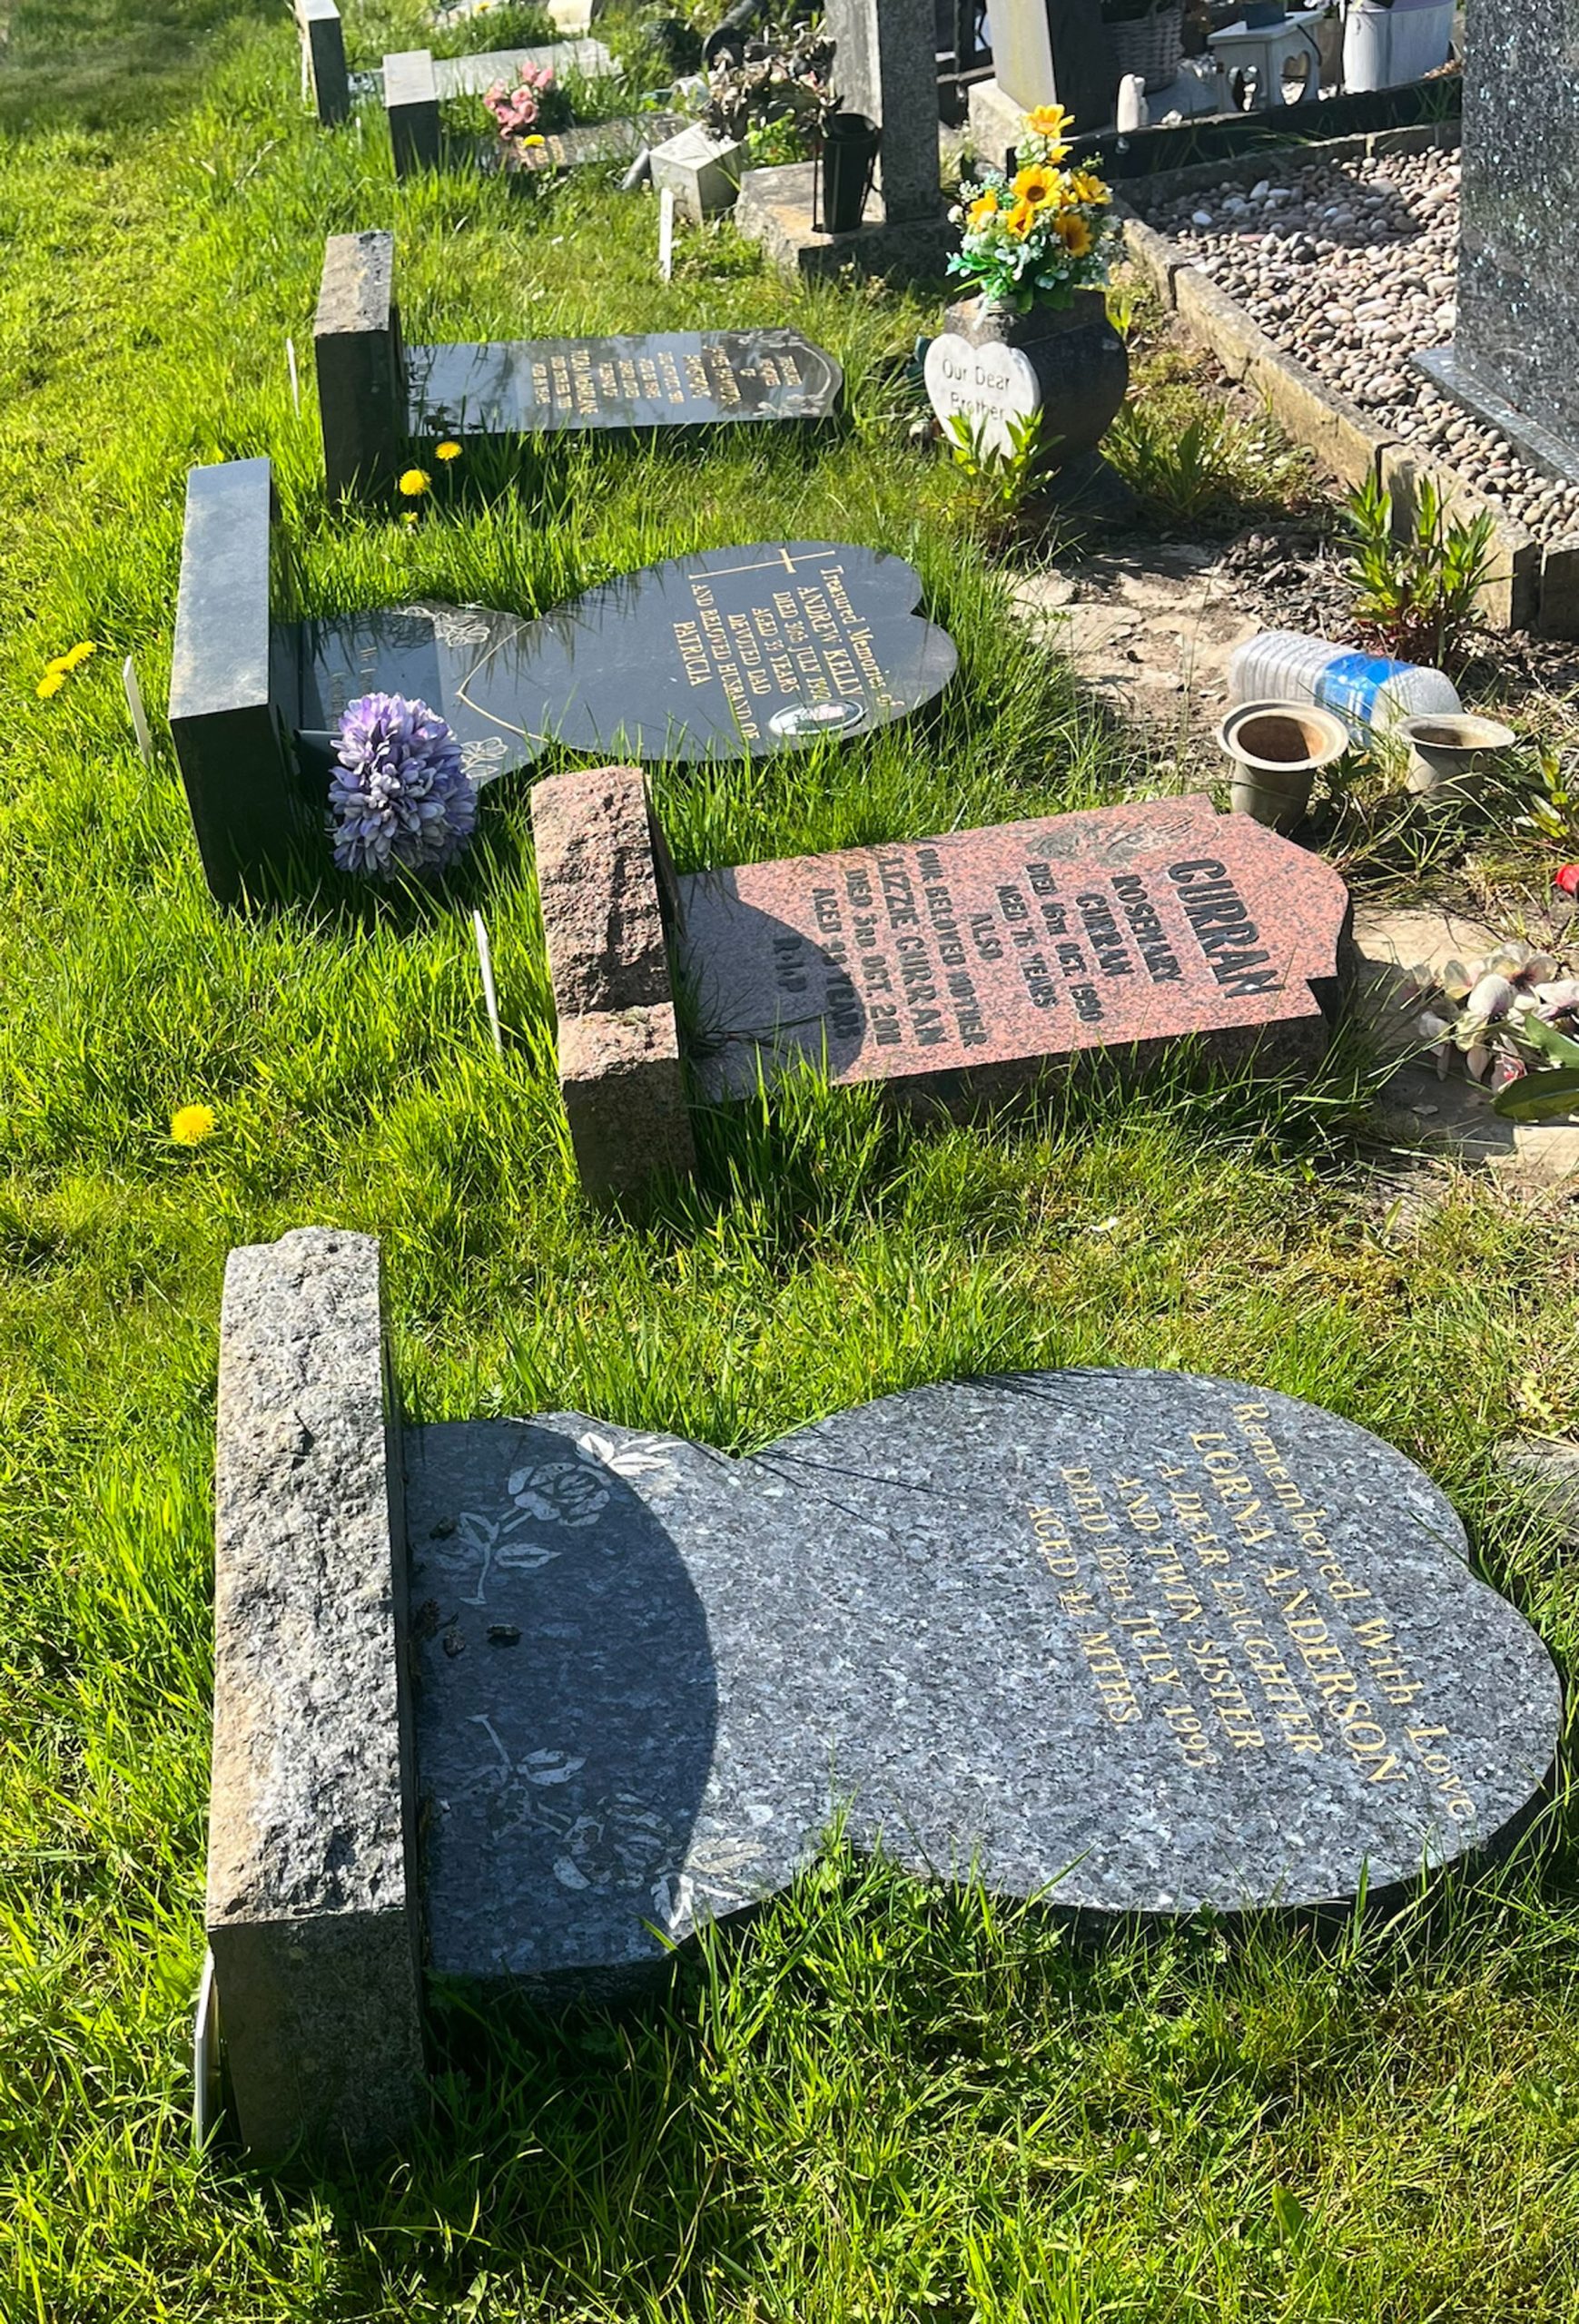 Petition launched to stop Renfrewshire Council toppling headstones in cemeteries